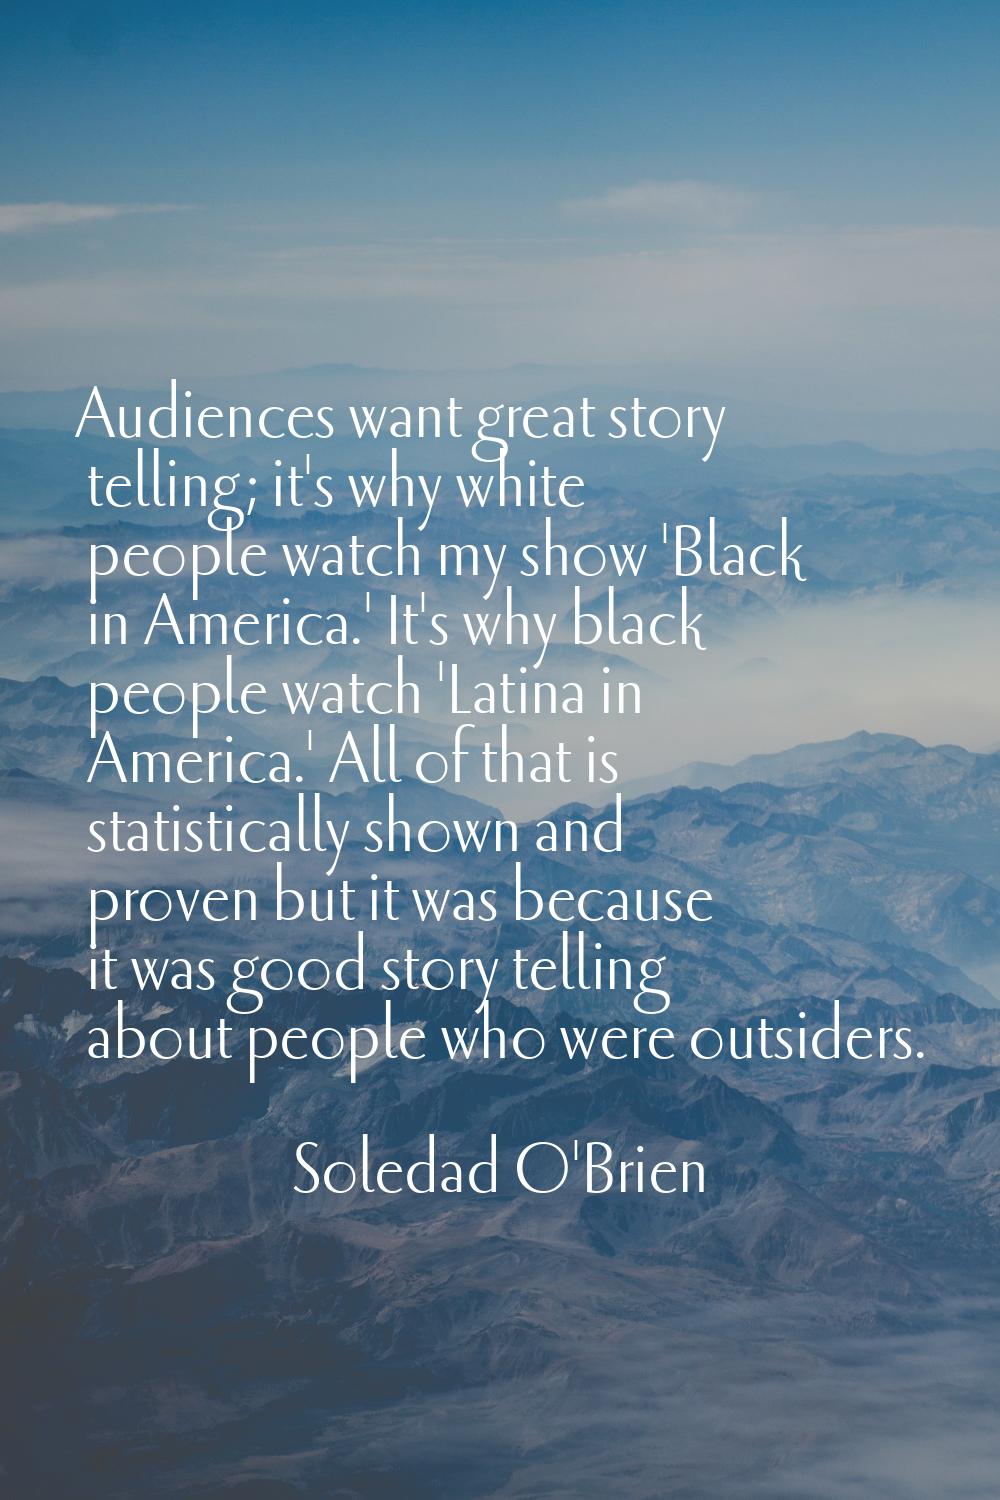 Audiences want great story telling; it's why white people watch my show 'Black in America.' It's wh